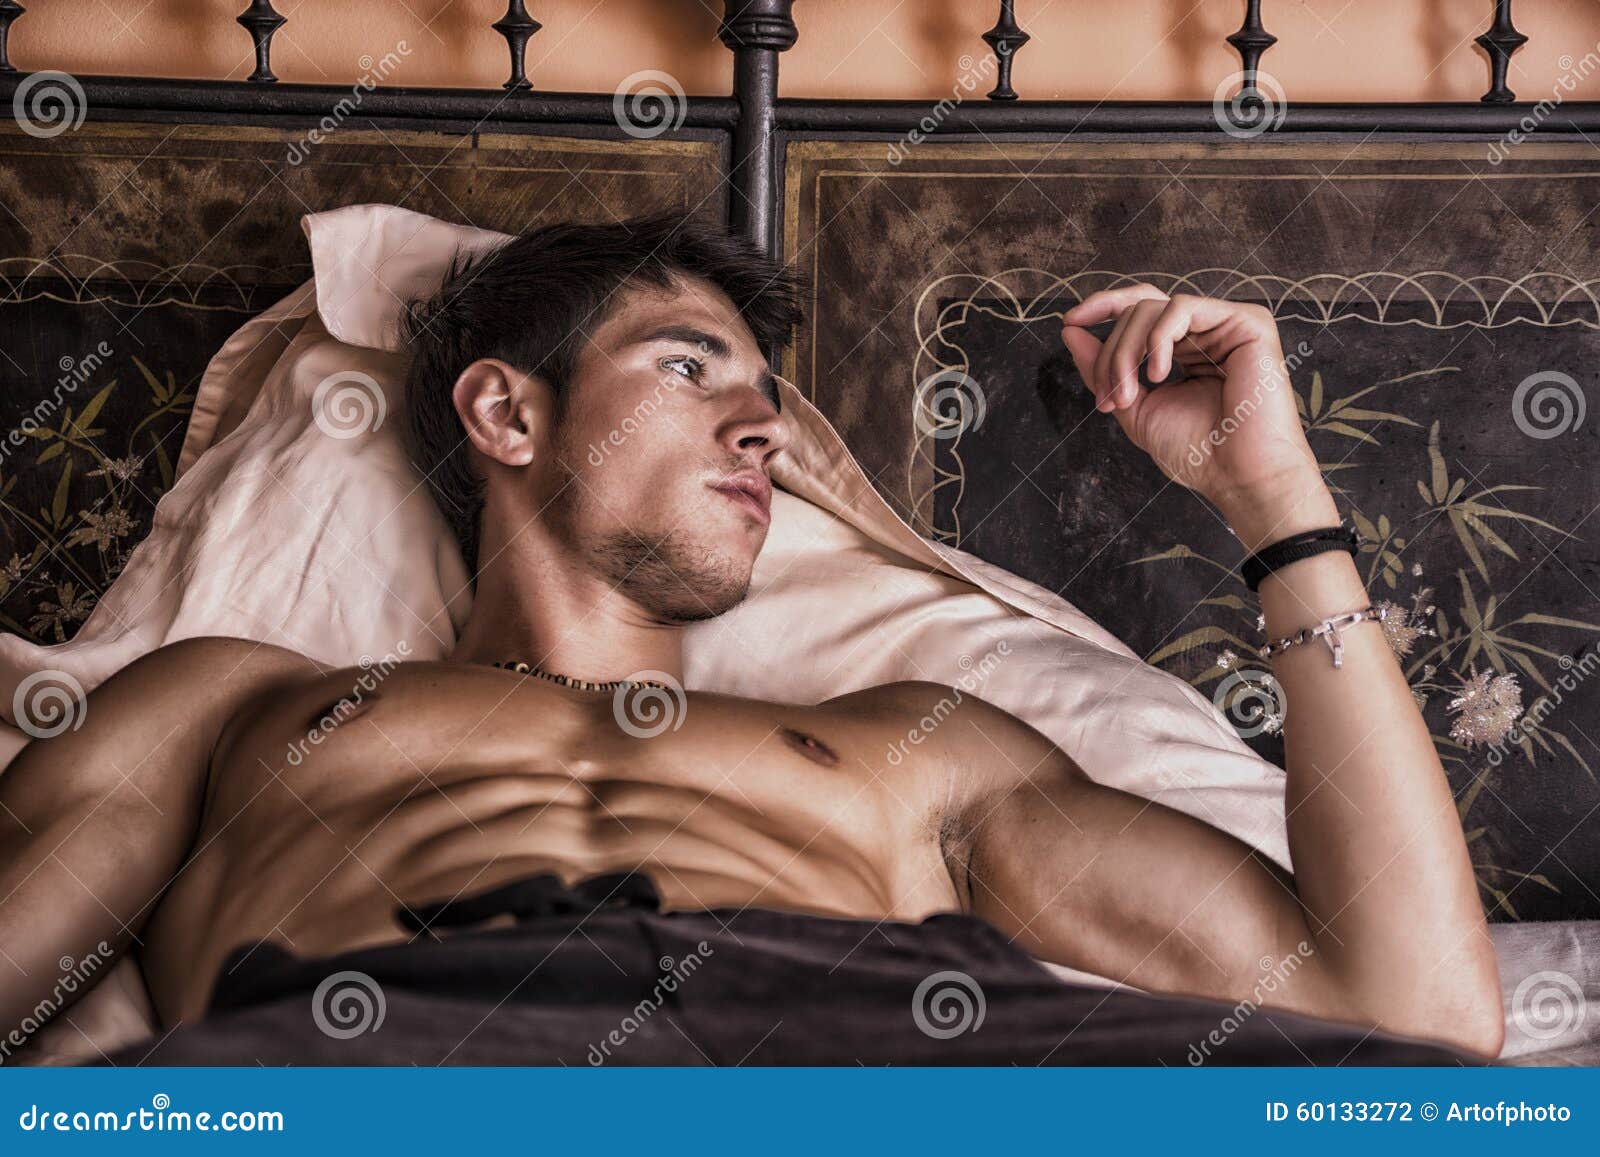 Shirtless Male Fashion Model With Beard Royalty Free Stock Image 72610558